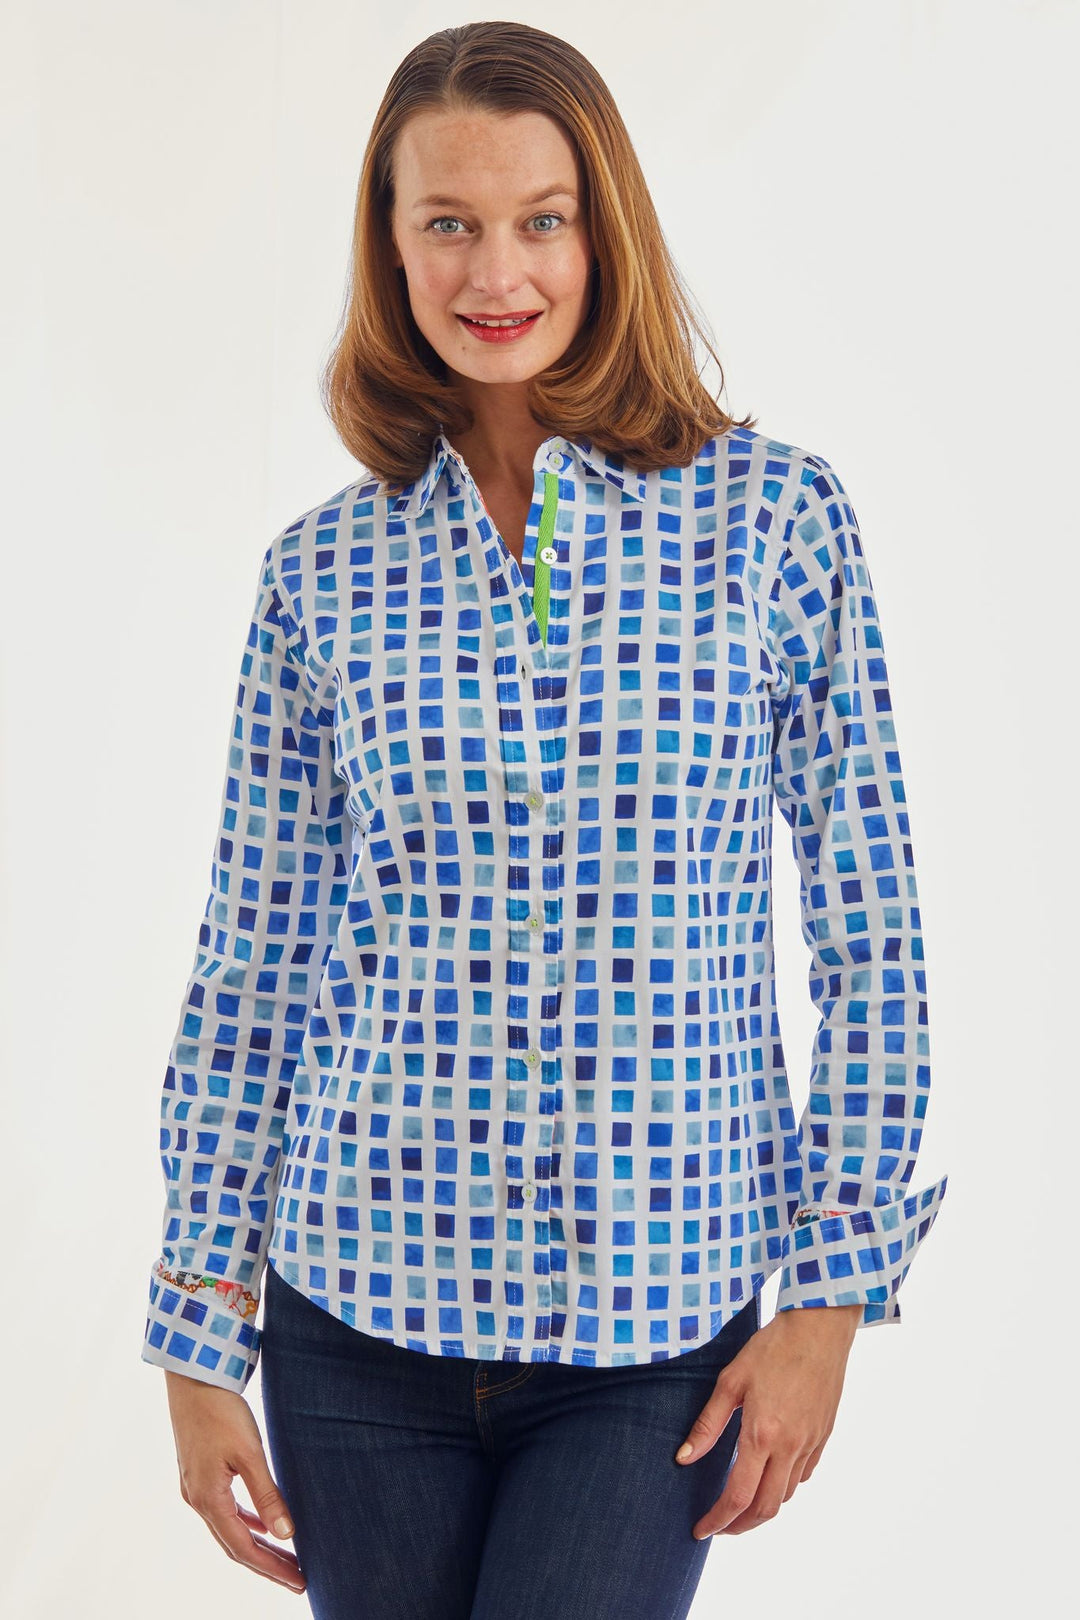 Dizzy Lizzie Rome Shirt White Ground with Blue Squares